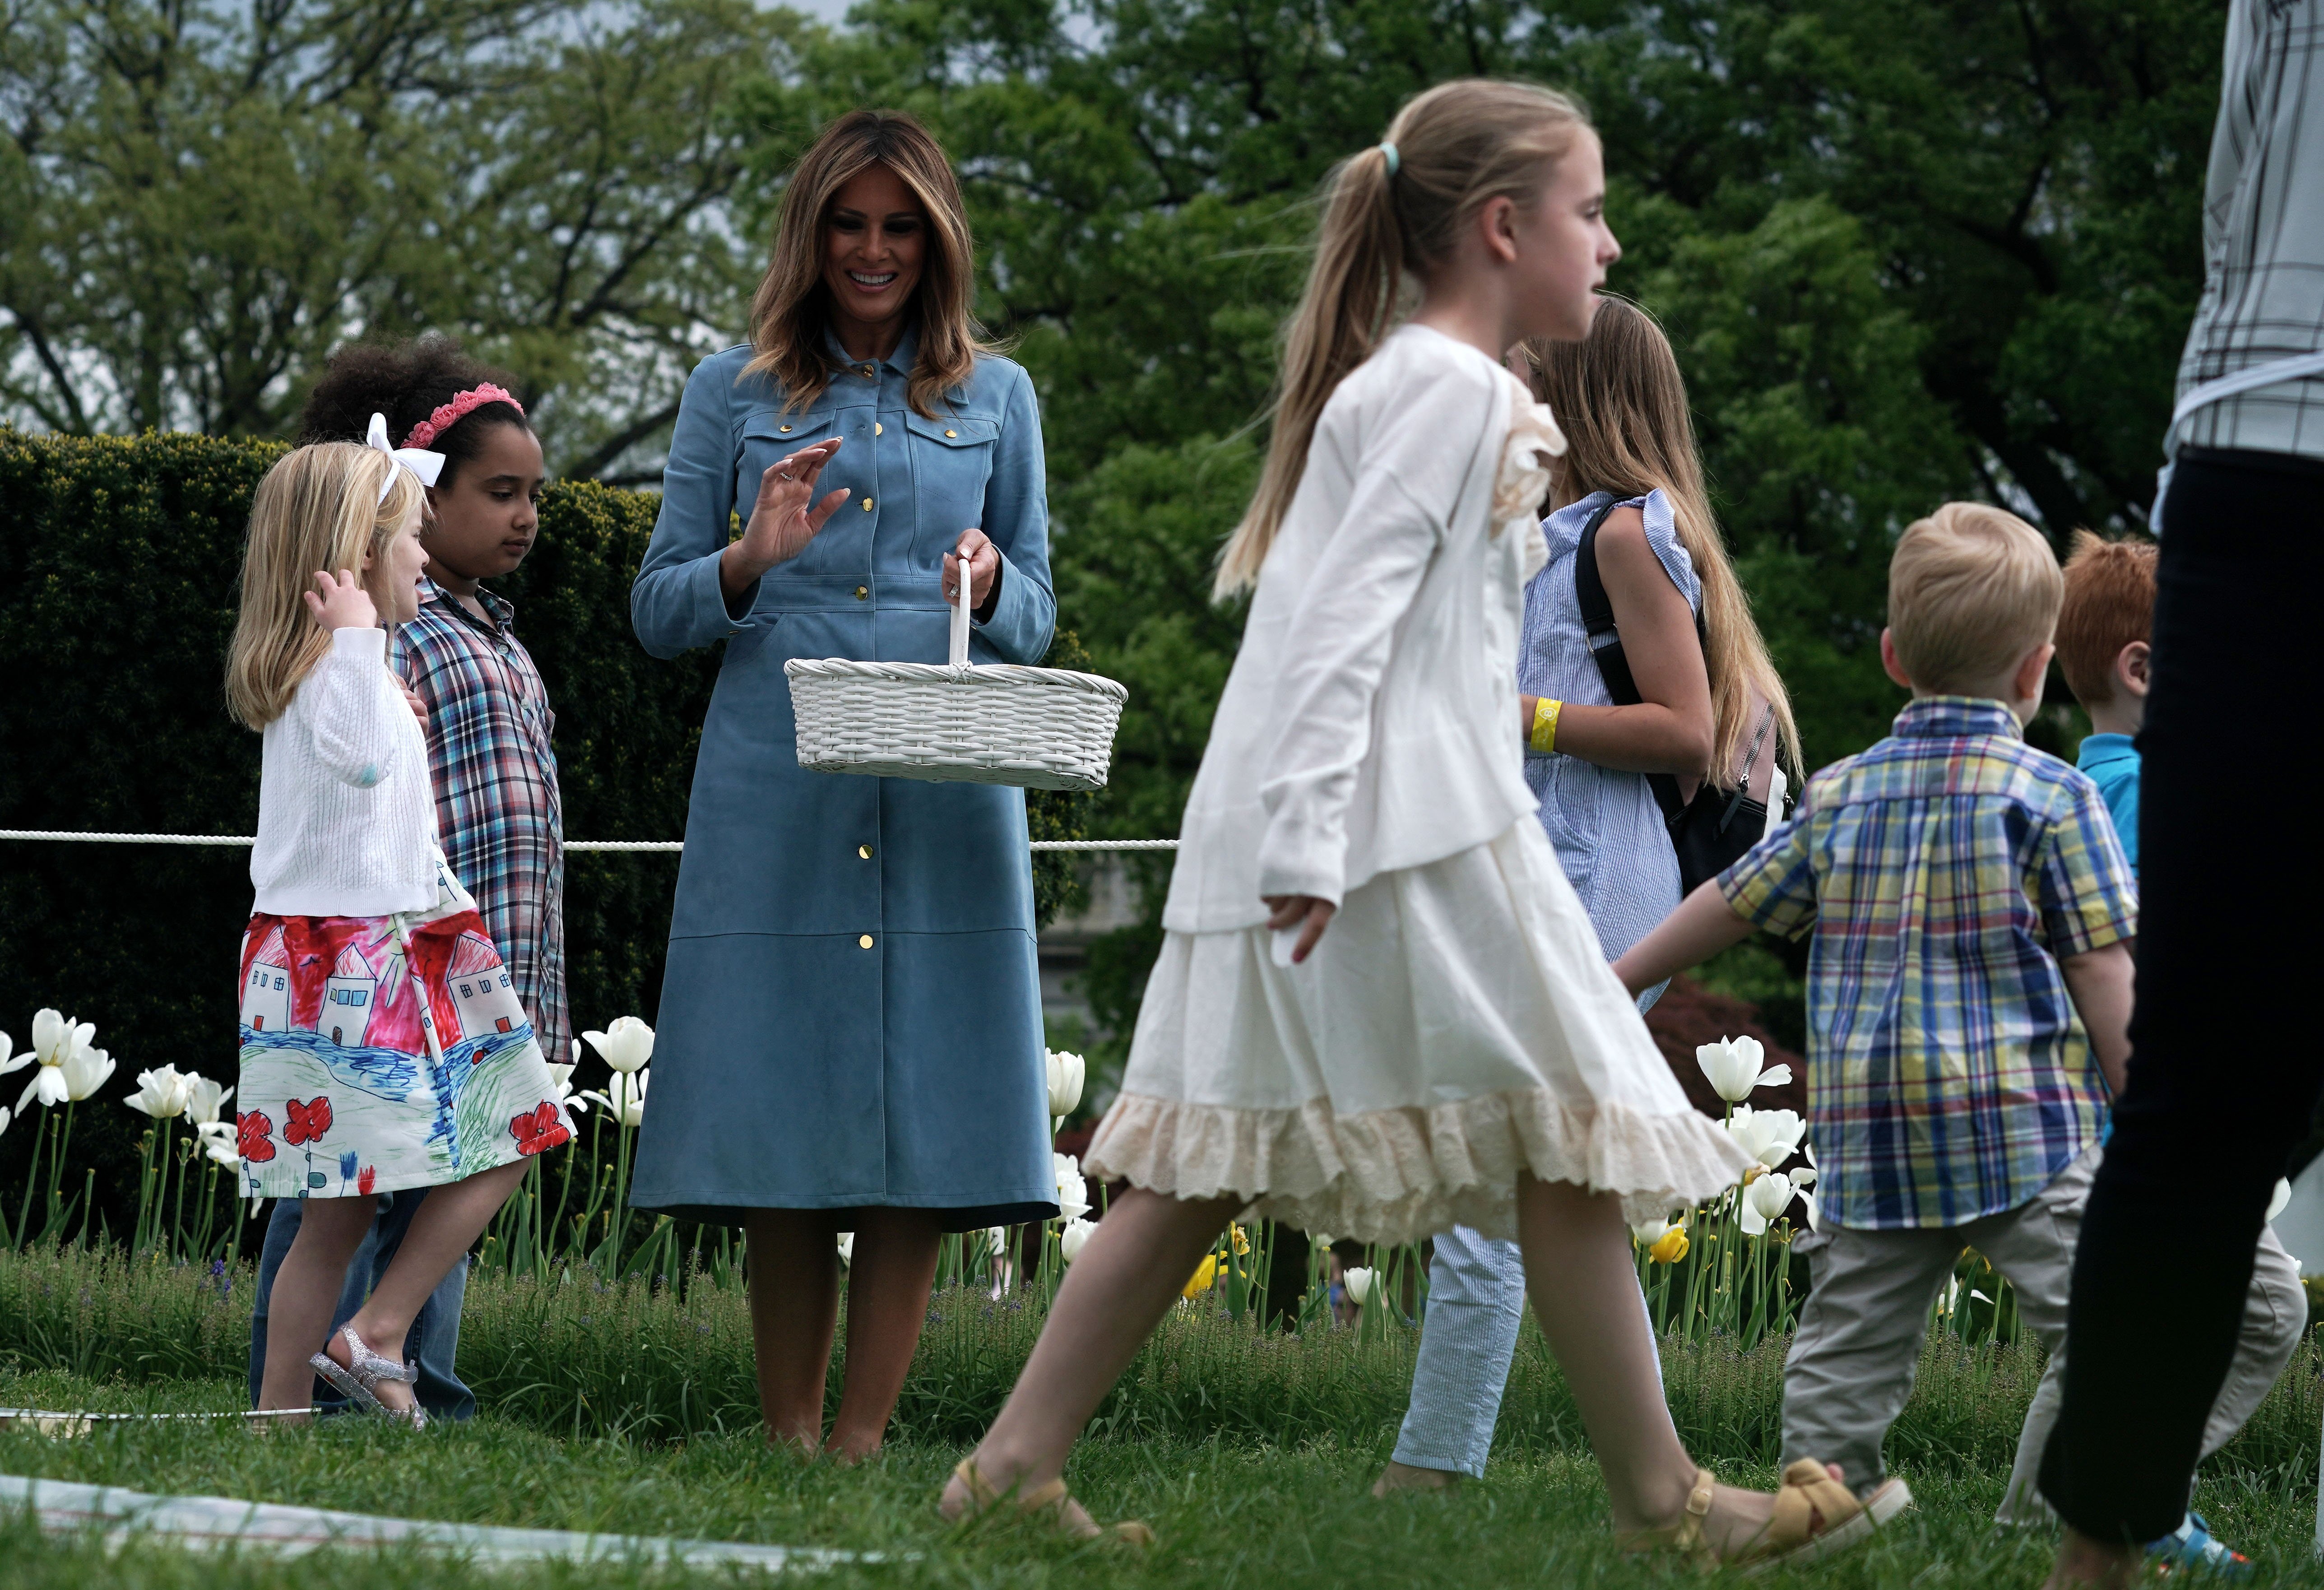 Melania Trump watching children participating in the 141st Easter Egg Roll | Photo: Getty Images